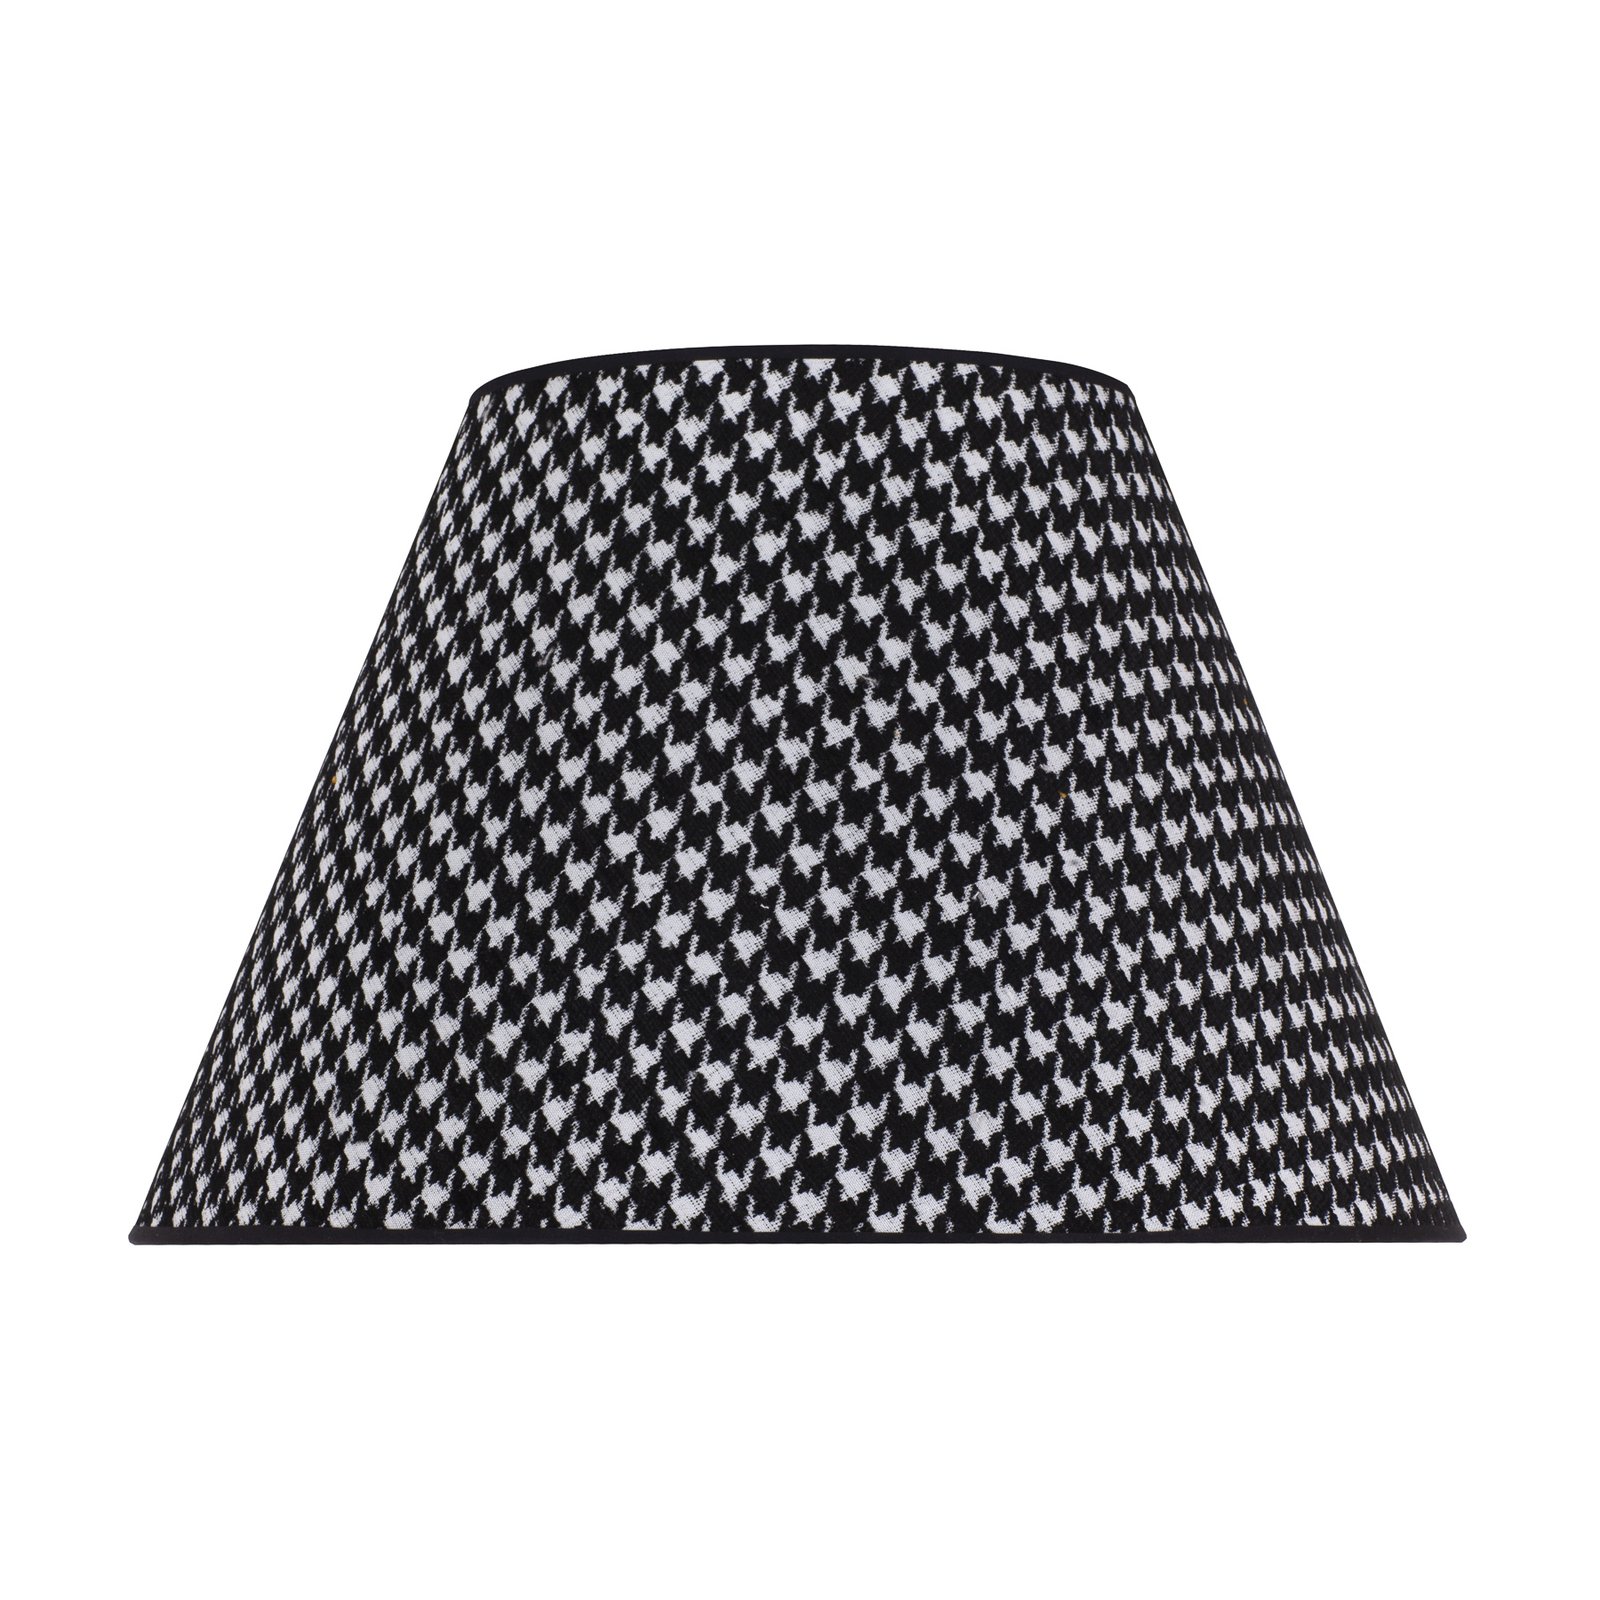 Sofia lampshade 31 cm, houndstooth pattern black